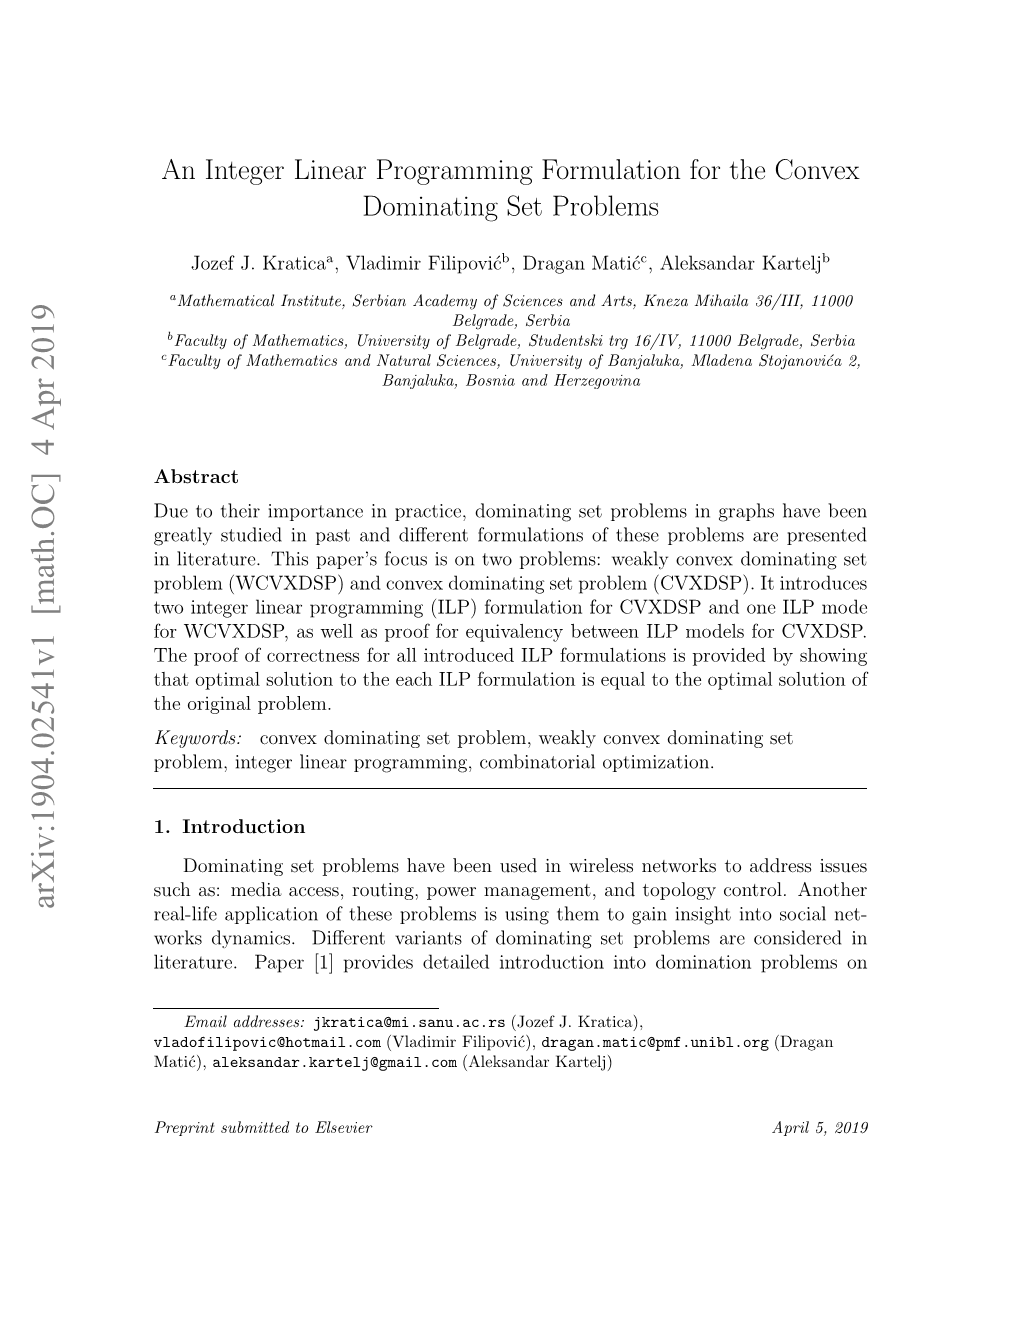 An Integer Linear Programming Formulation for the Convex